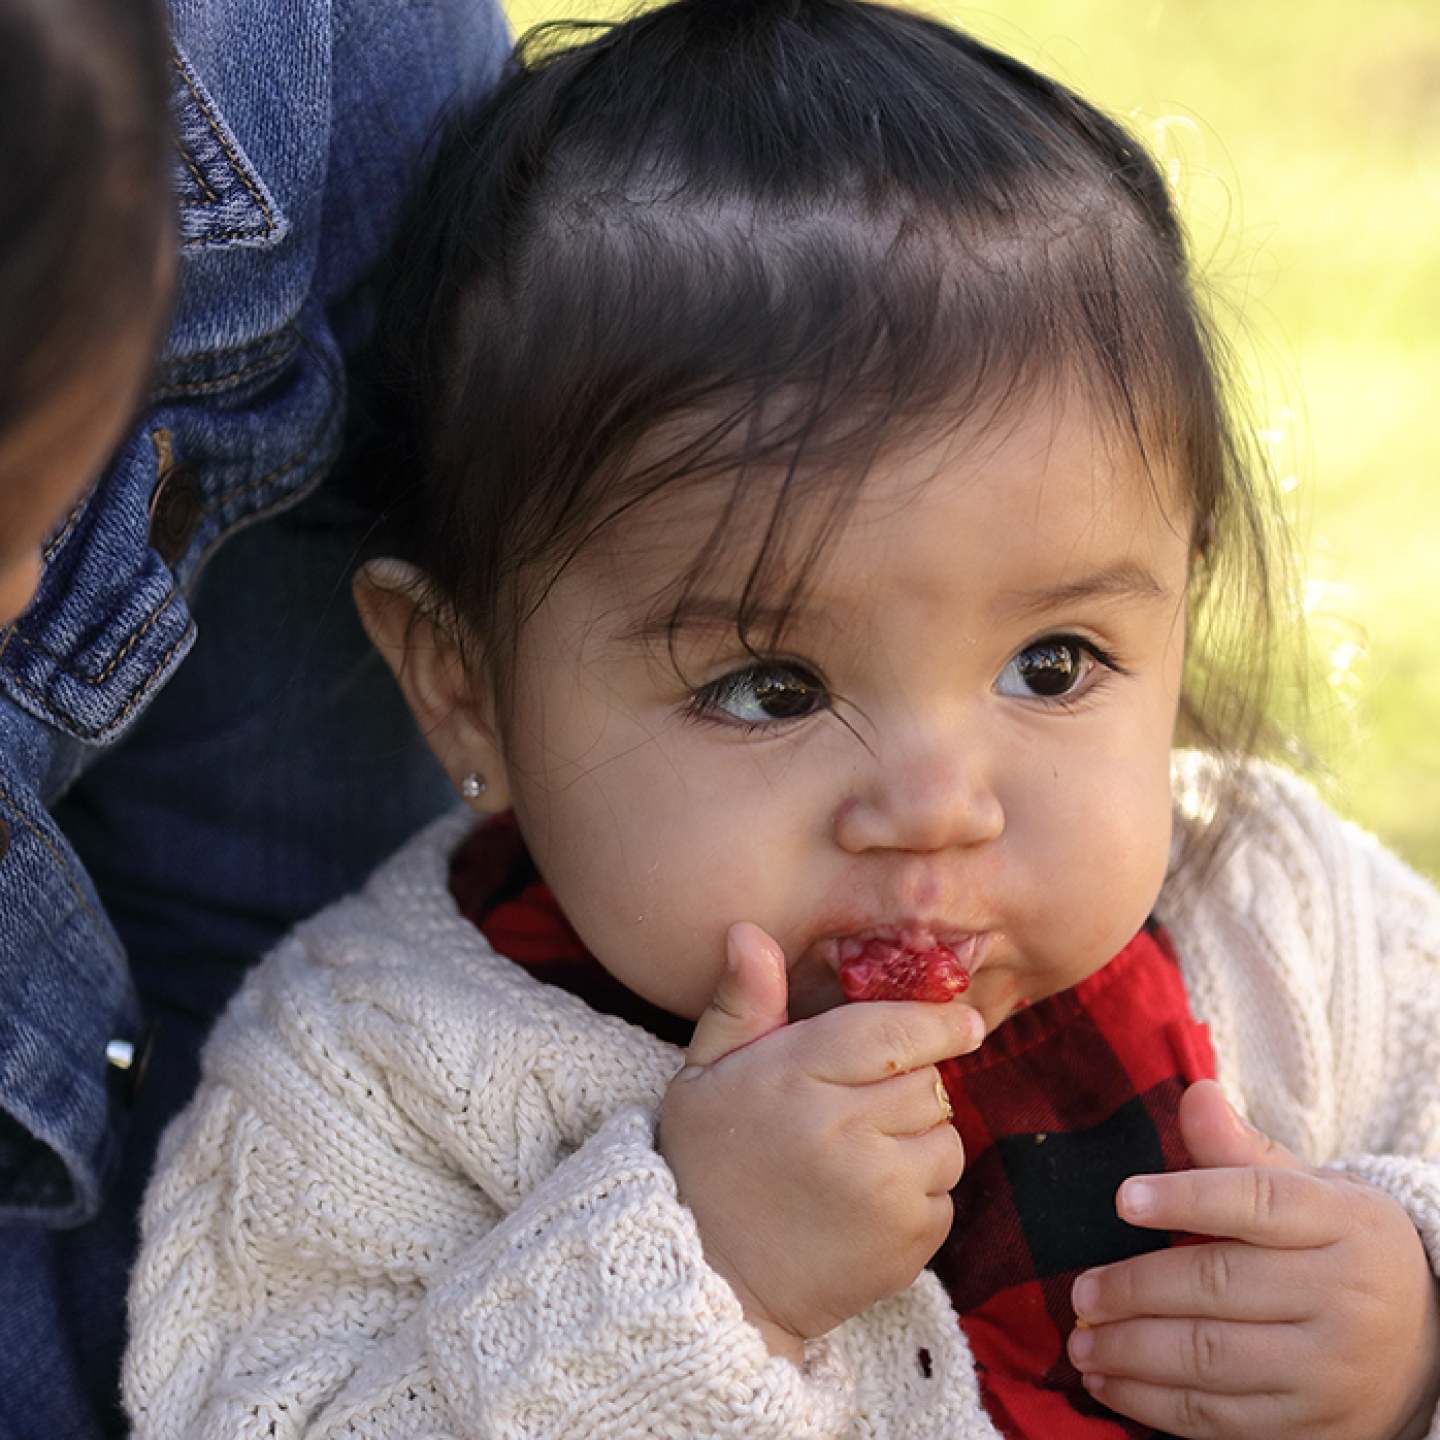 Baby_eating_strawberry_SQ-ish_Chlorpyrifos